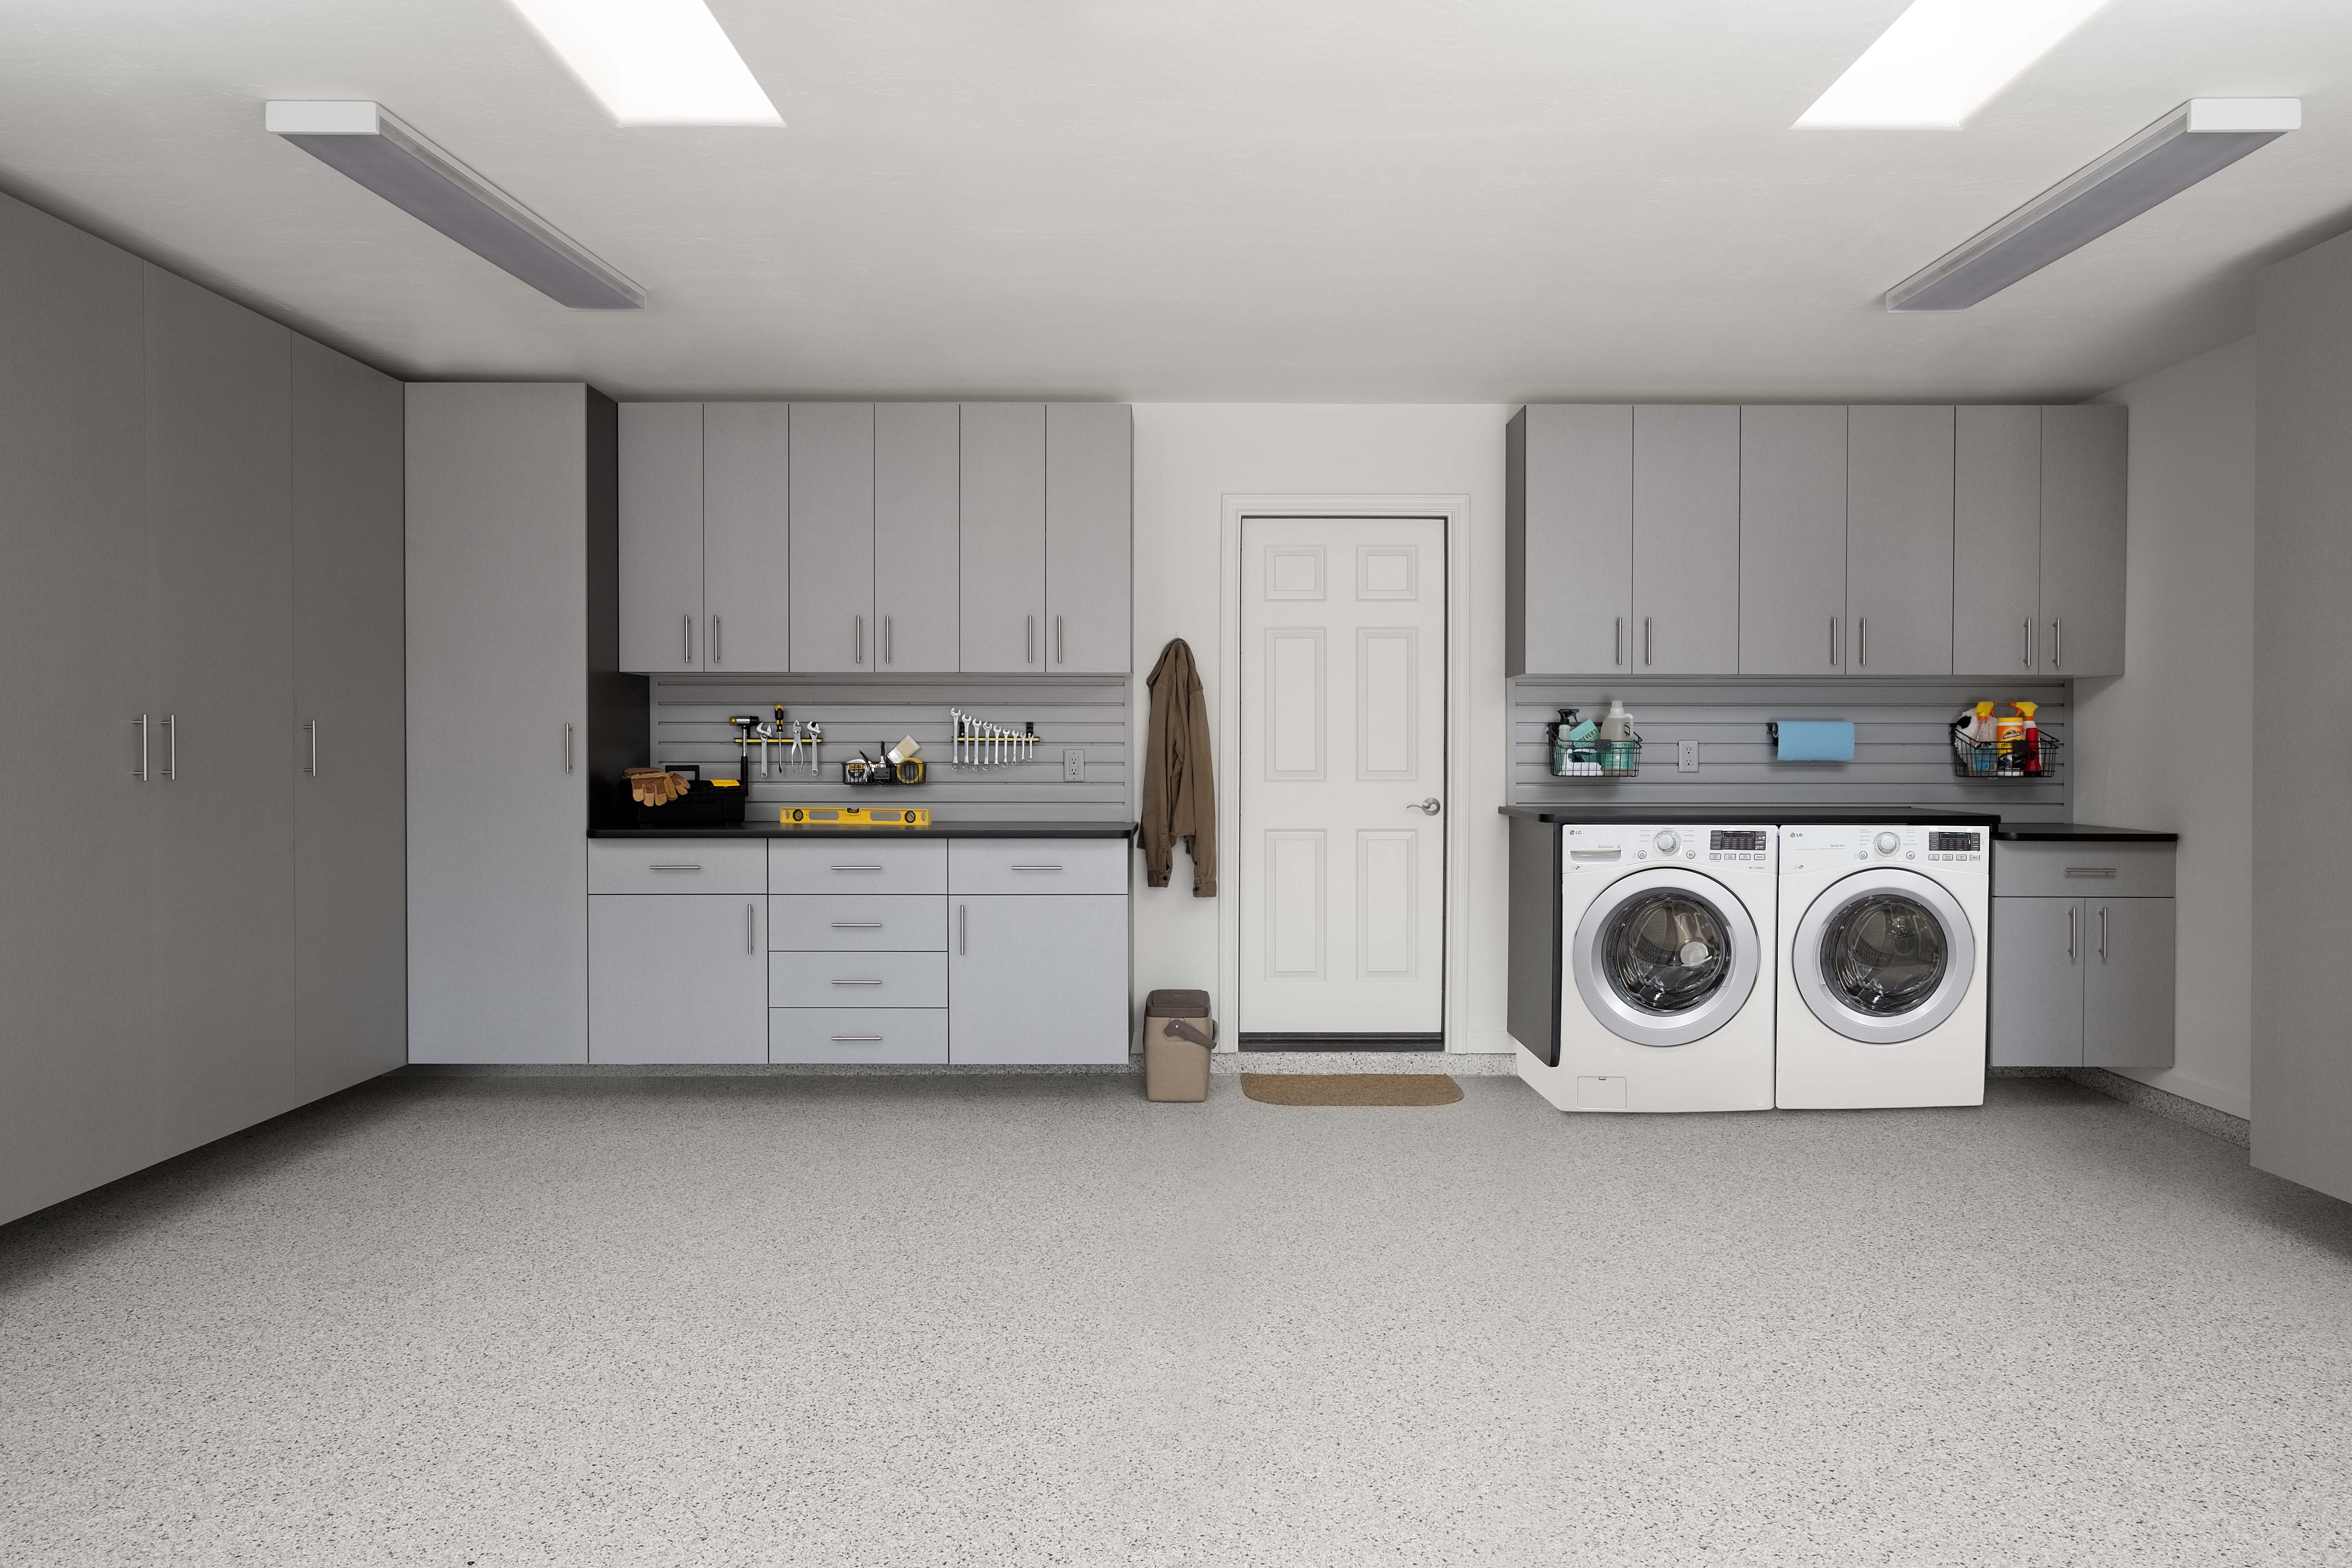 How to Make the Most of Your Garage Laundry Room - Arizona Garage Design